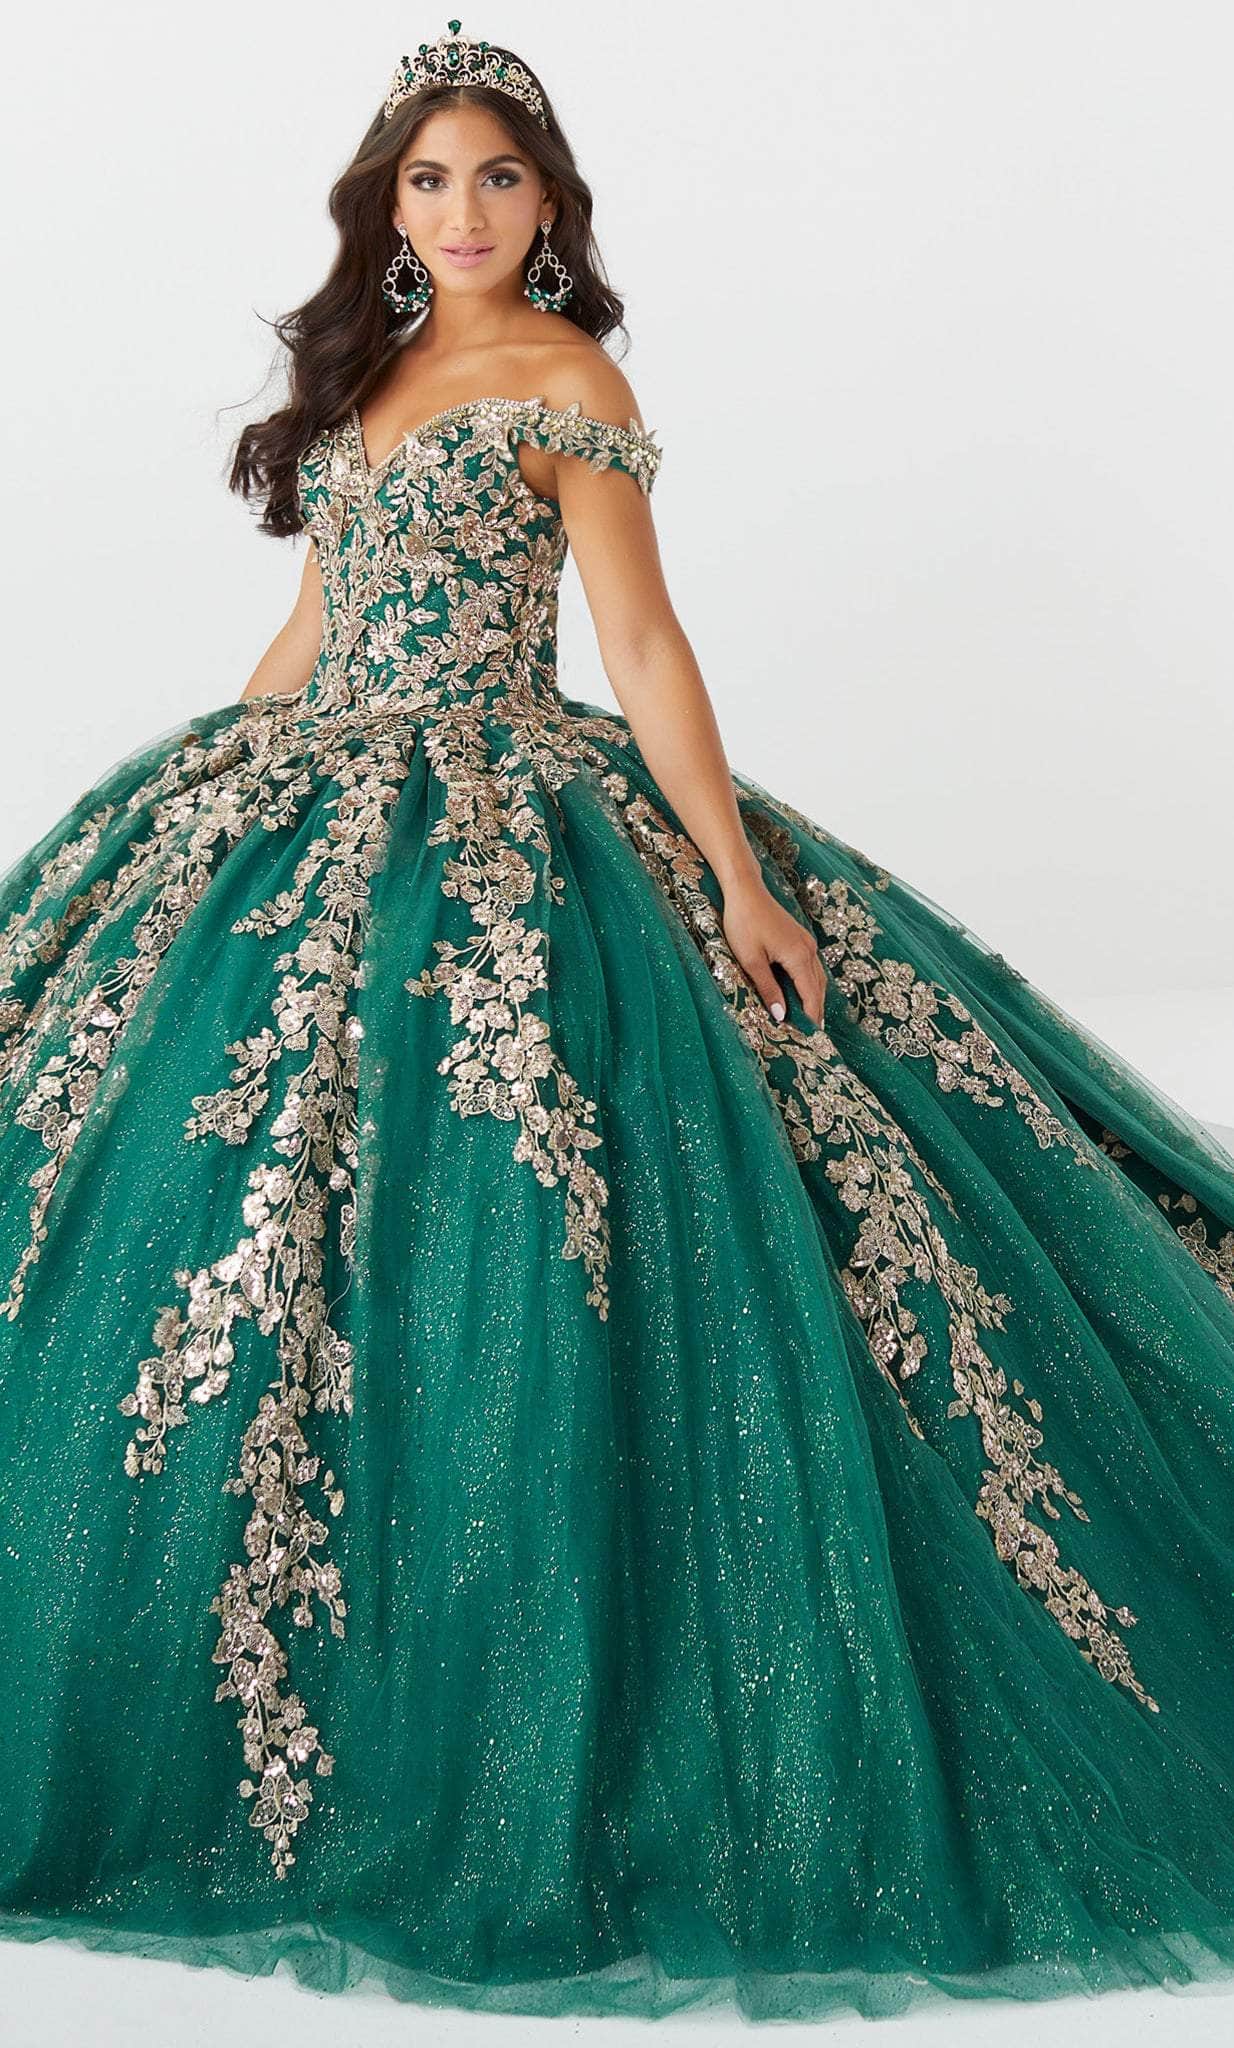 Image of Fiesta Gowns 56471 - Intricately Embellished Voluminous Dress